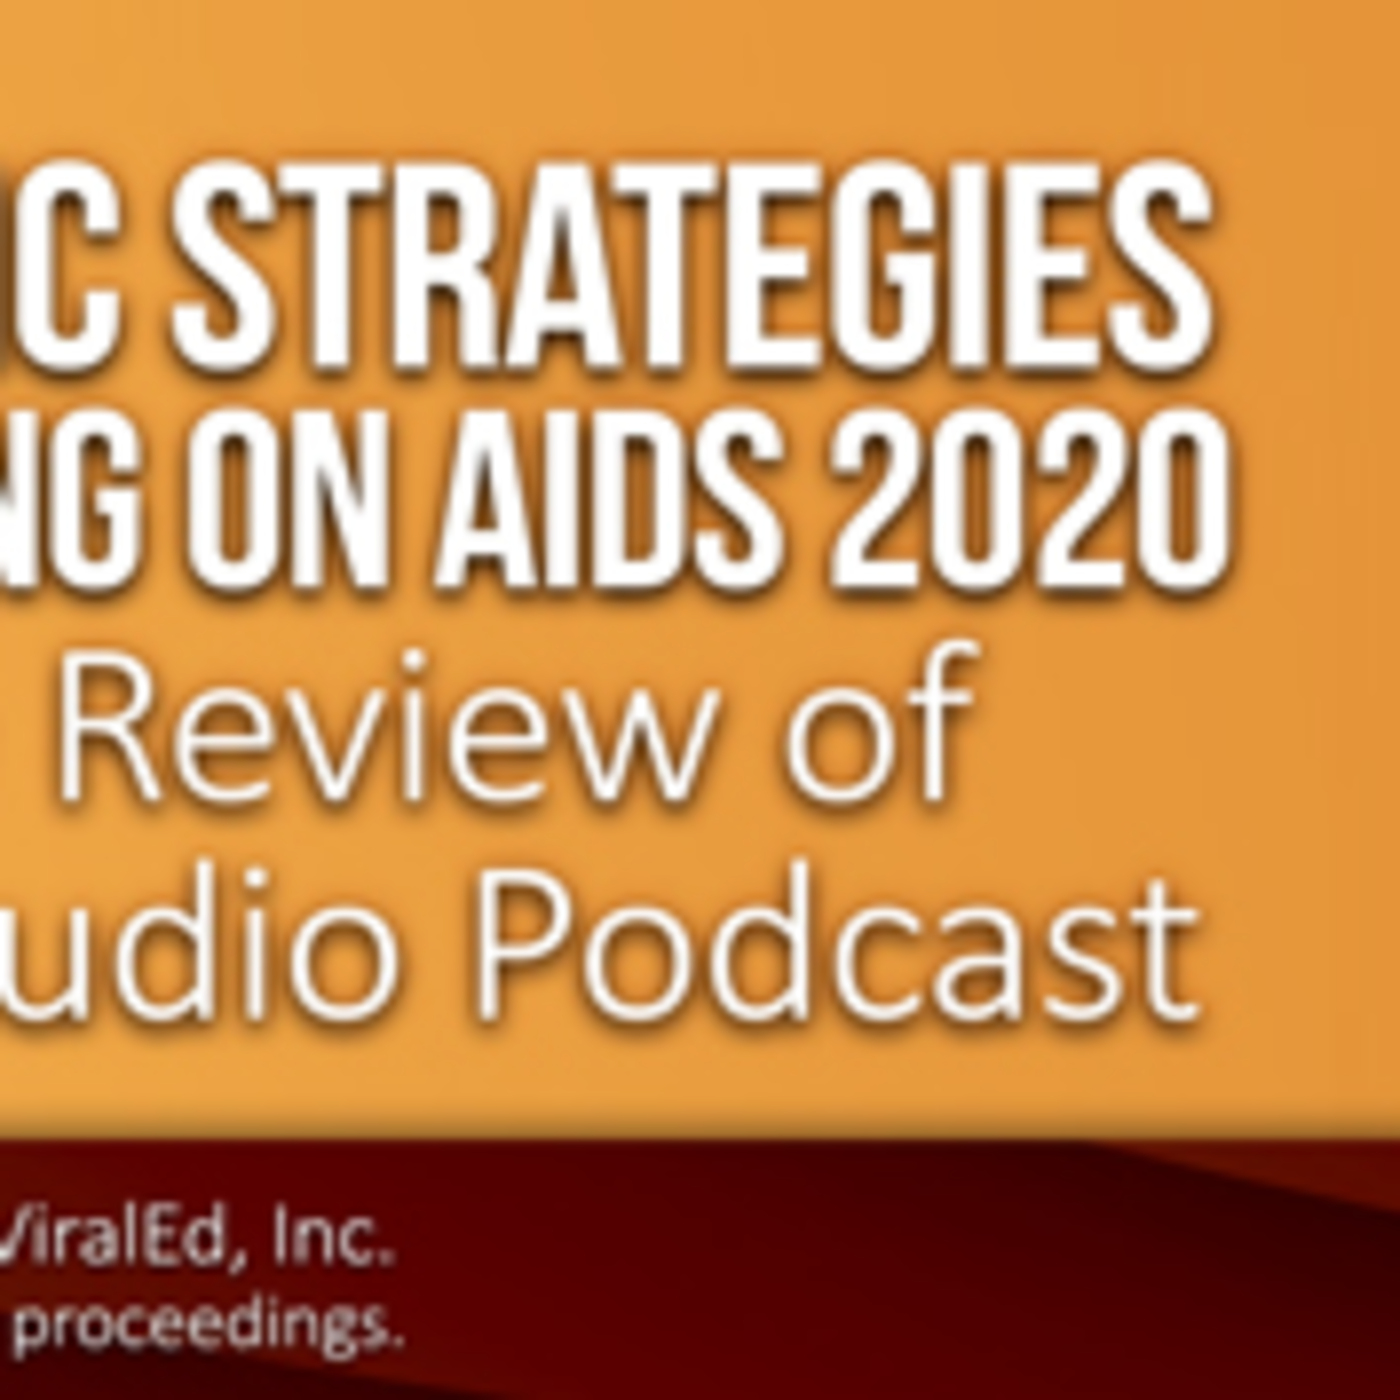 Rapid-Fire Review of AIDS 2020